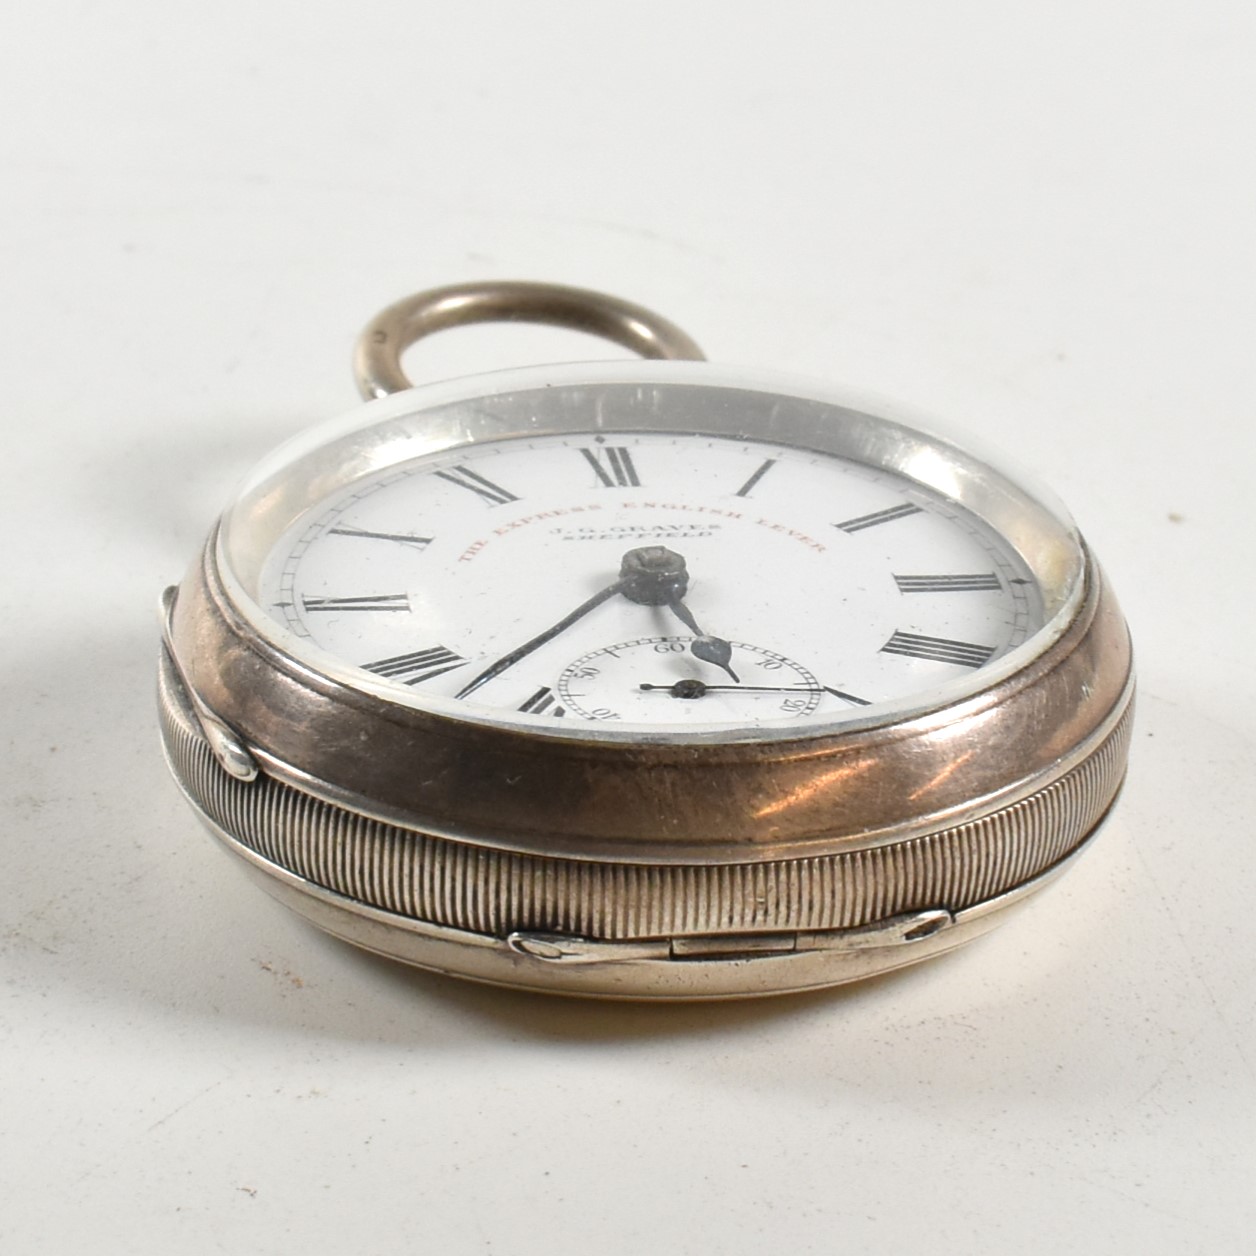 SILVER HALLMARKED JG GRAVES OPEN FACED POCKET WATCH - Image 8 of 8